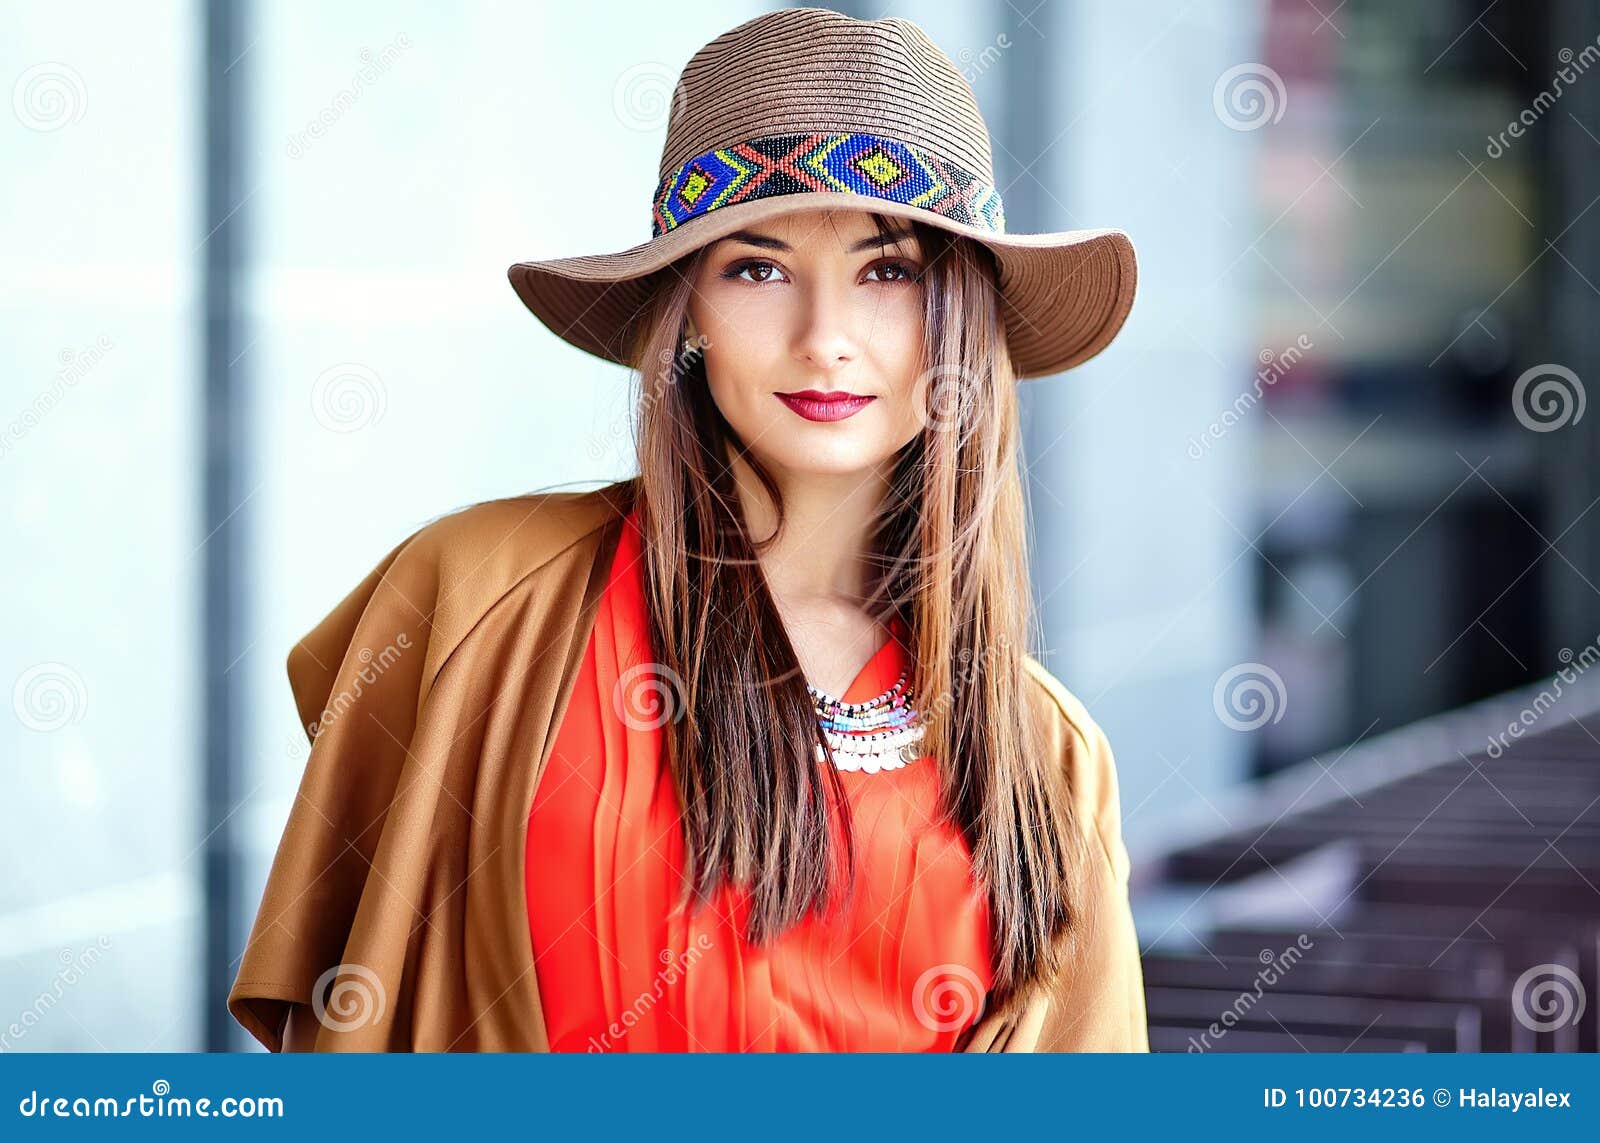 Hippie Clothes Stock Illustrations – 3,878 Hippie Clothes Stock